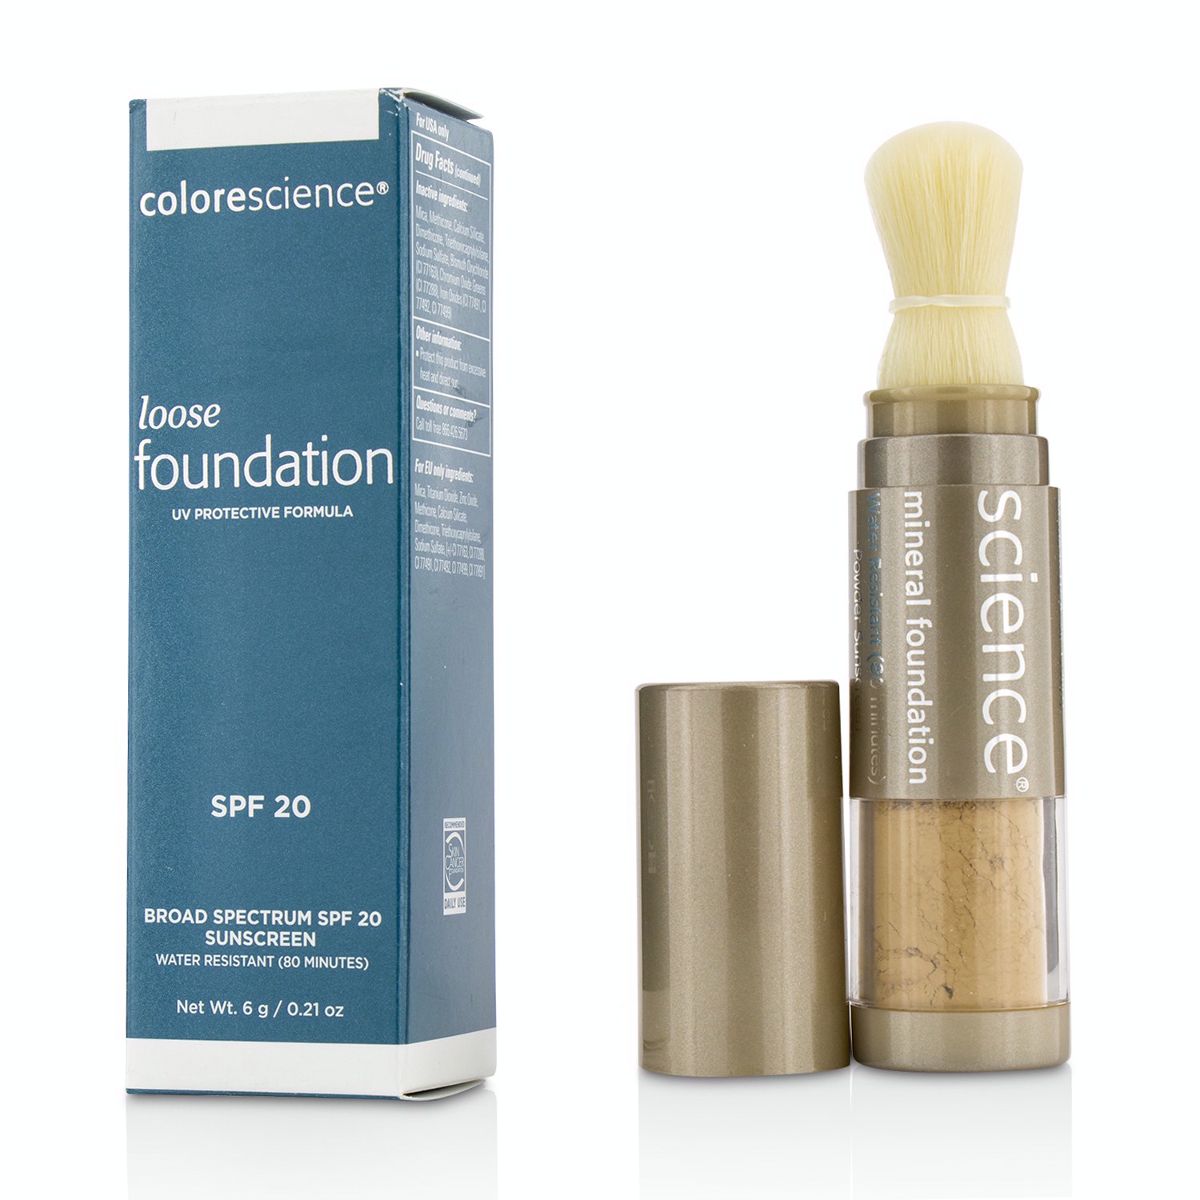 Loose Mineral Foundation Brush SPF20 - Tan Natural Colorescience Image